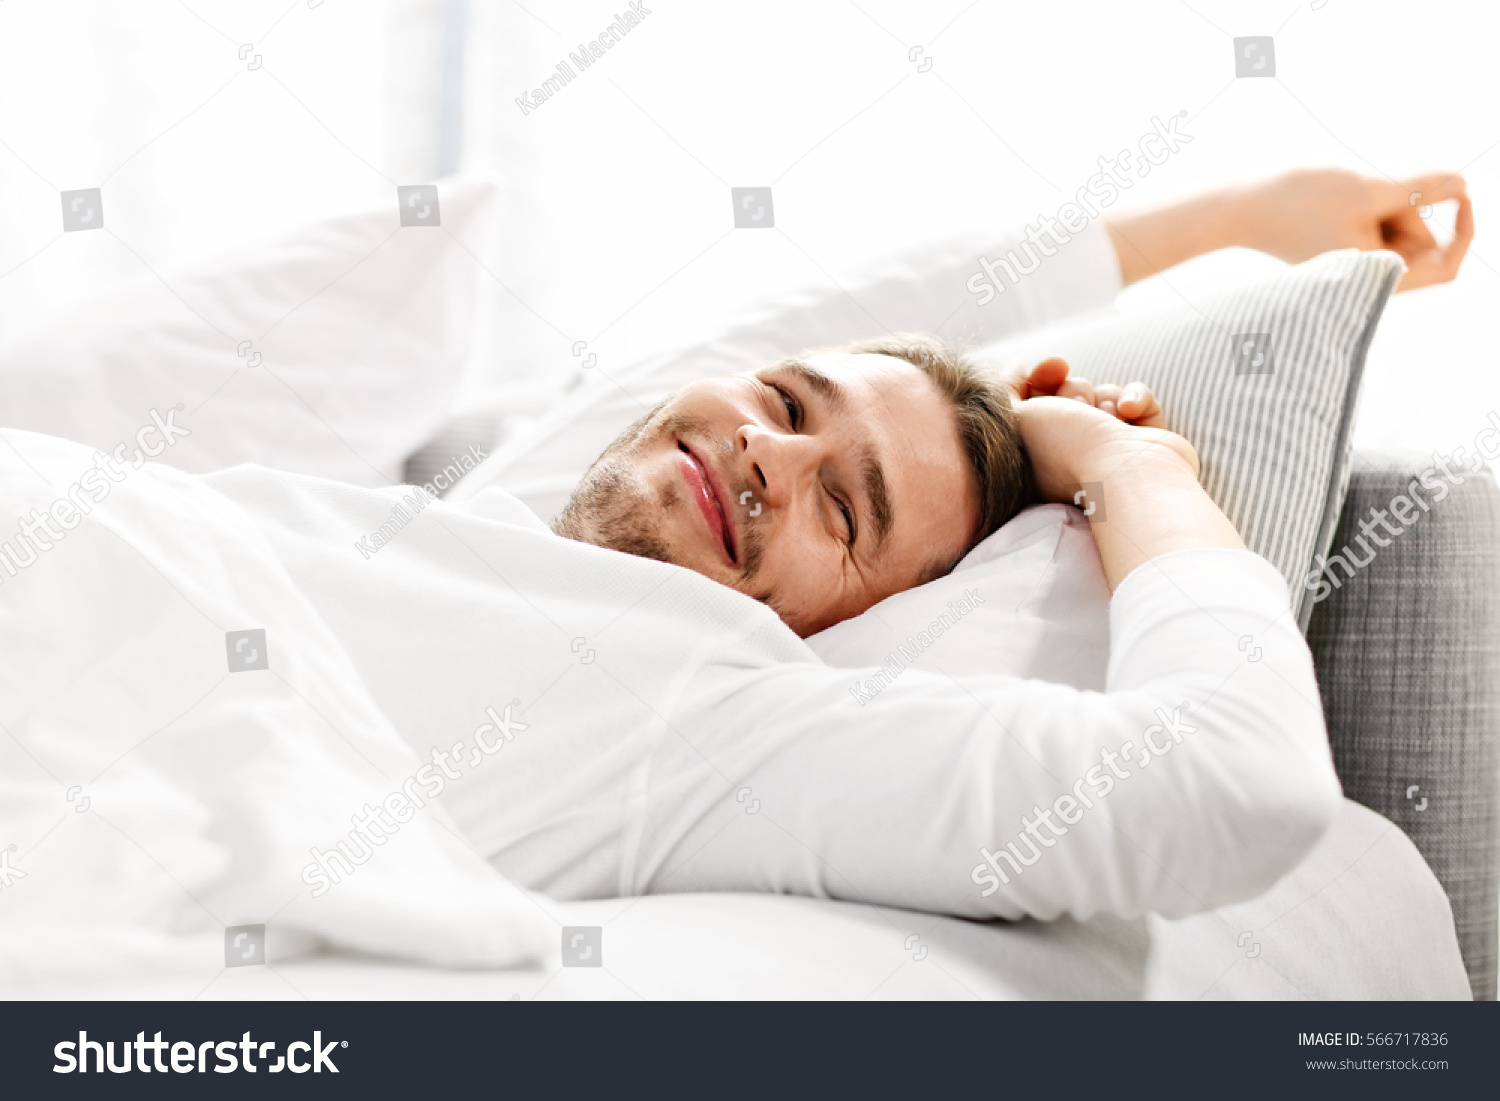 Picture showing young man stretching in bed #566717836